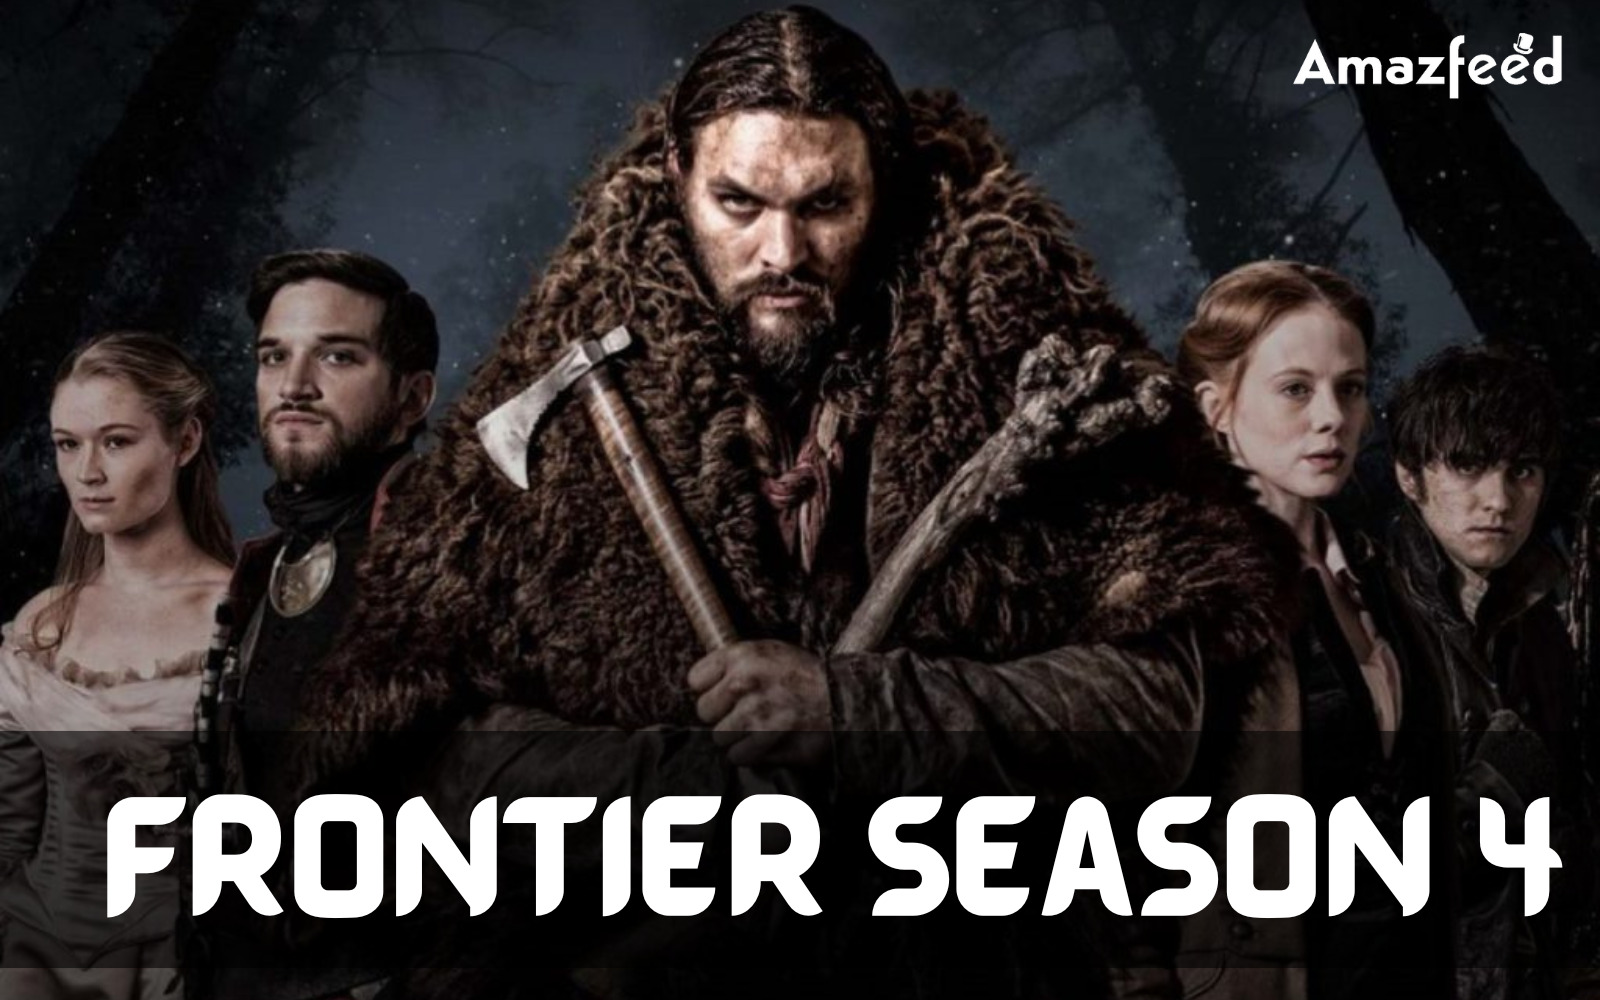 What can the viewers expect from Frontier season 4